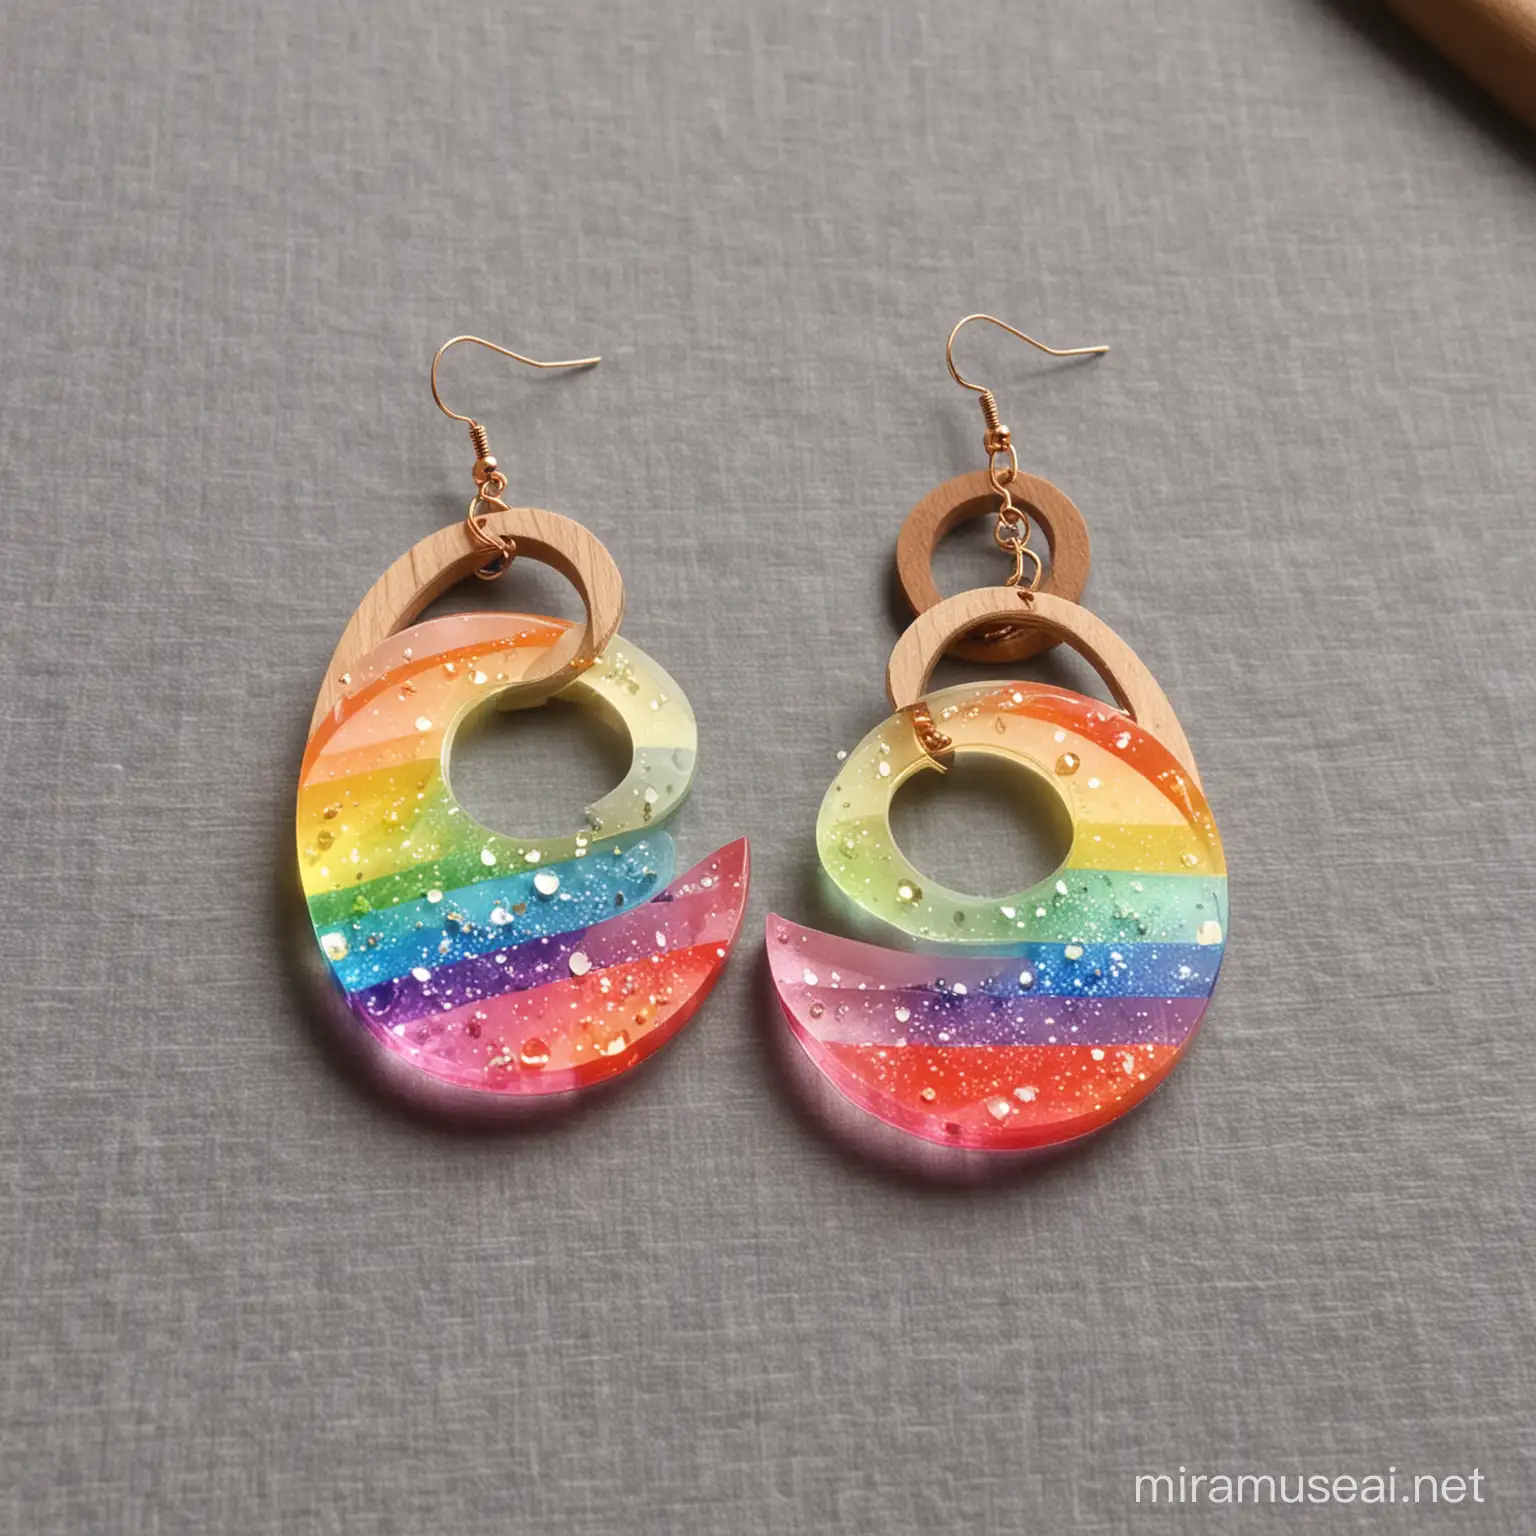 please show some resin earrings with half side wooden piece and other half in resin with rainbow color effect